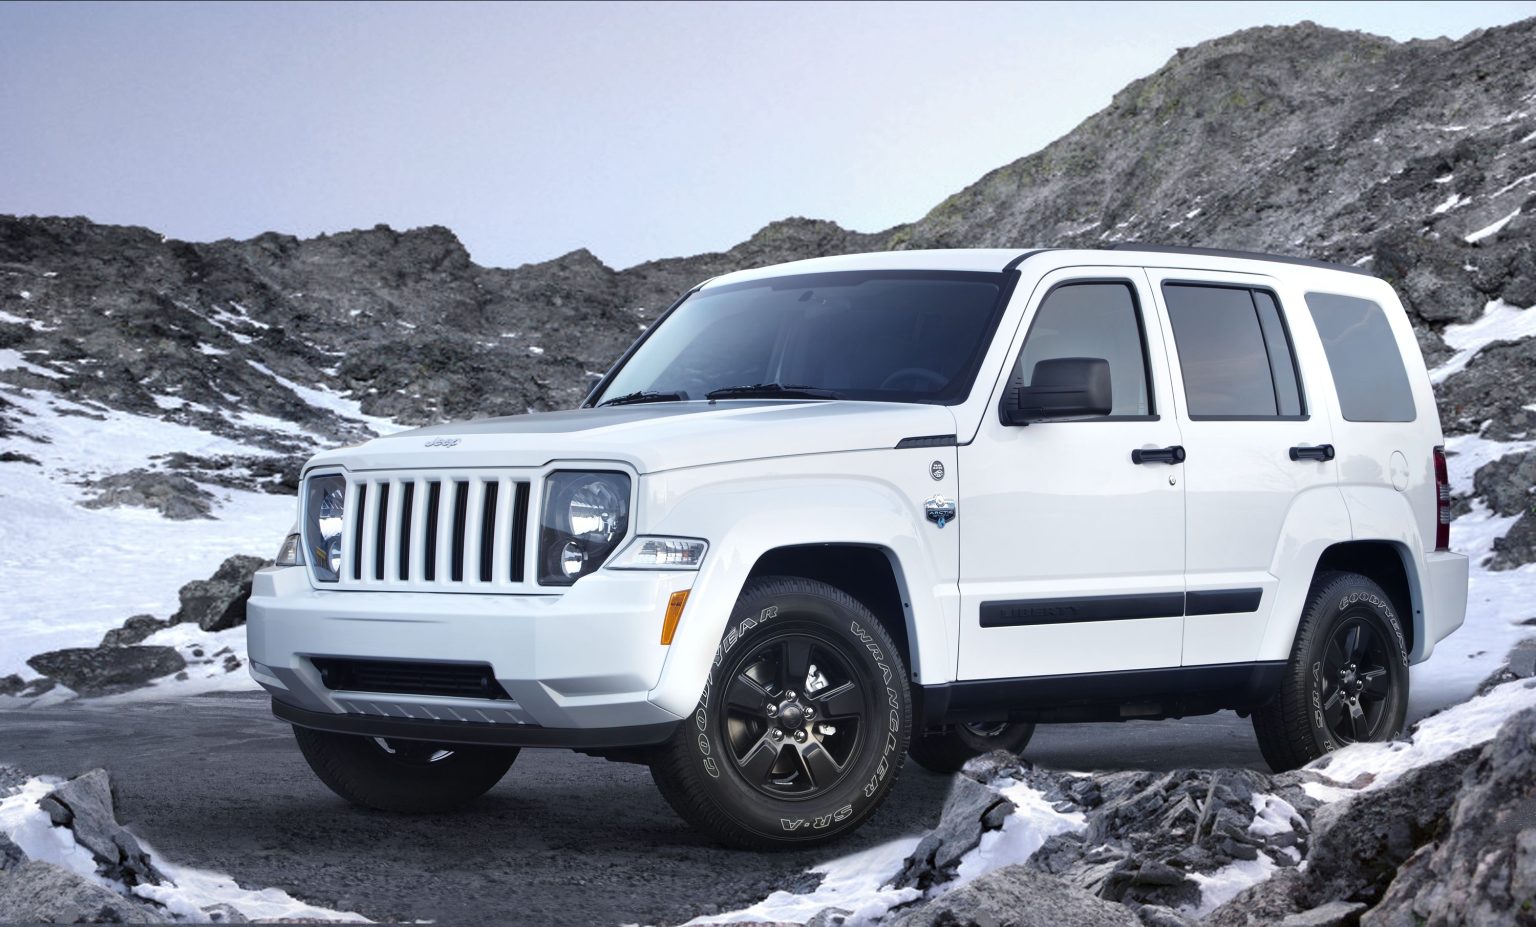 2024 Jeep Liberty - All Set to Make a Comeback After 12 Years2024 Jeep